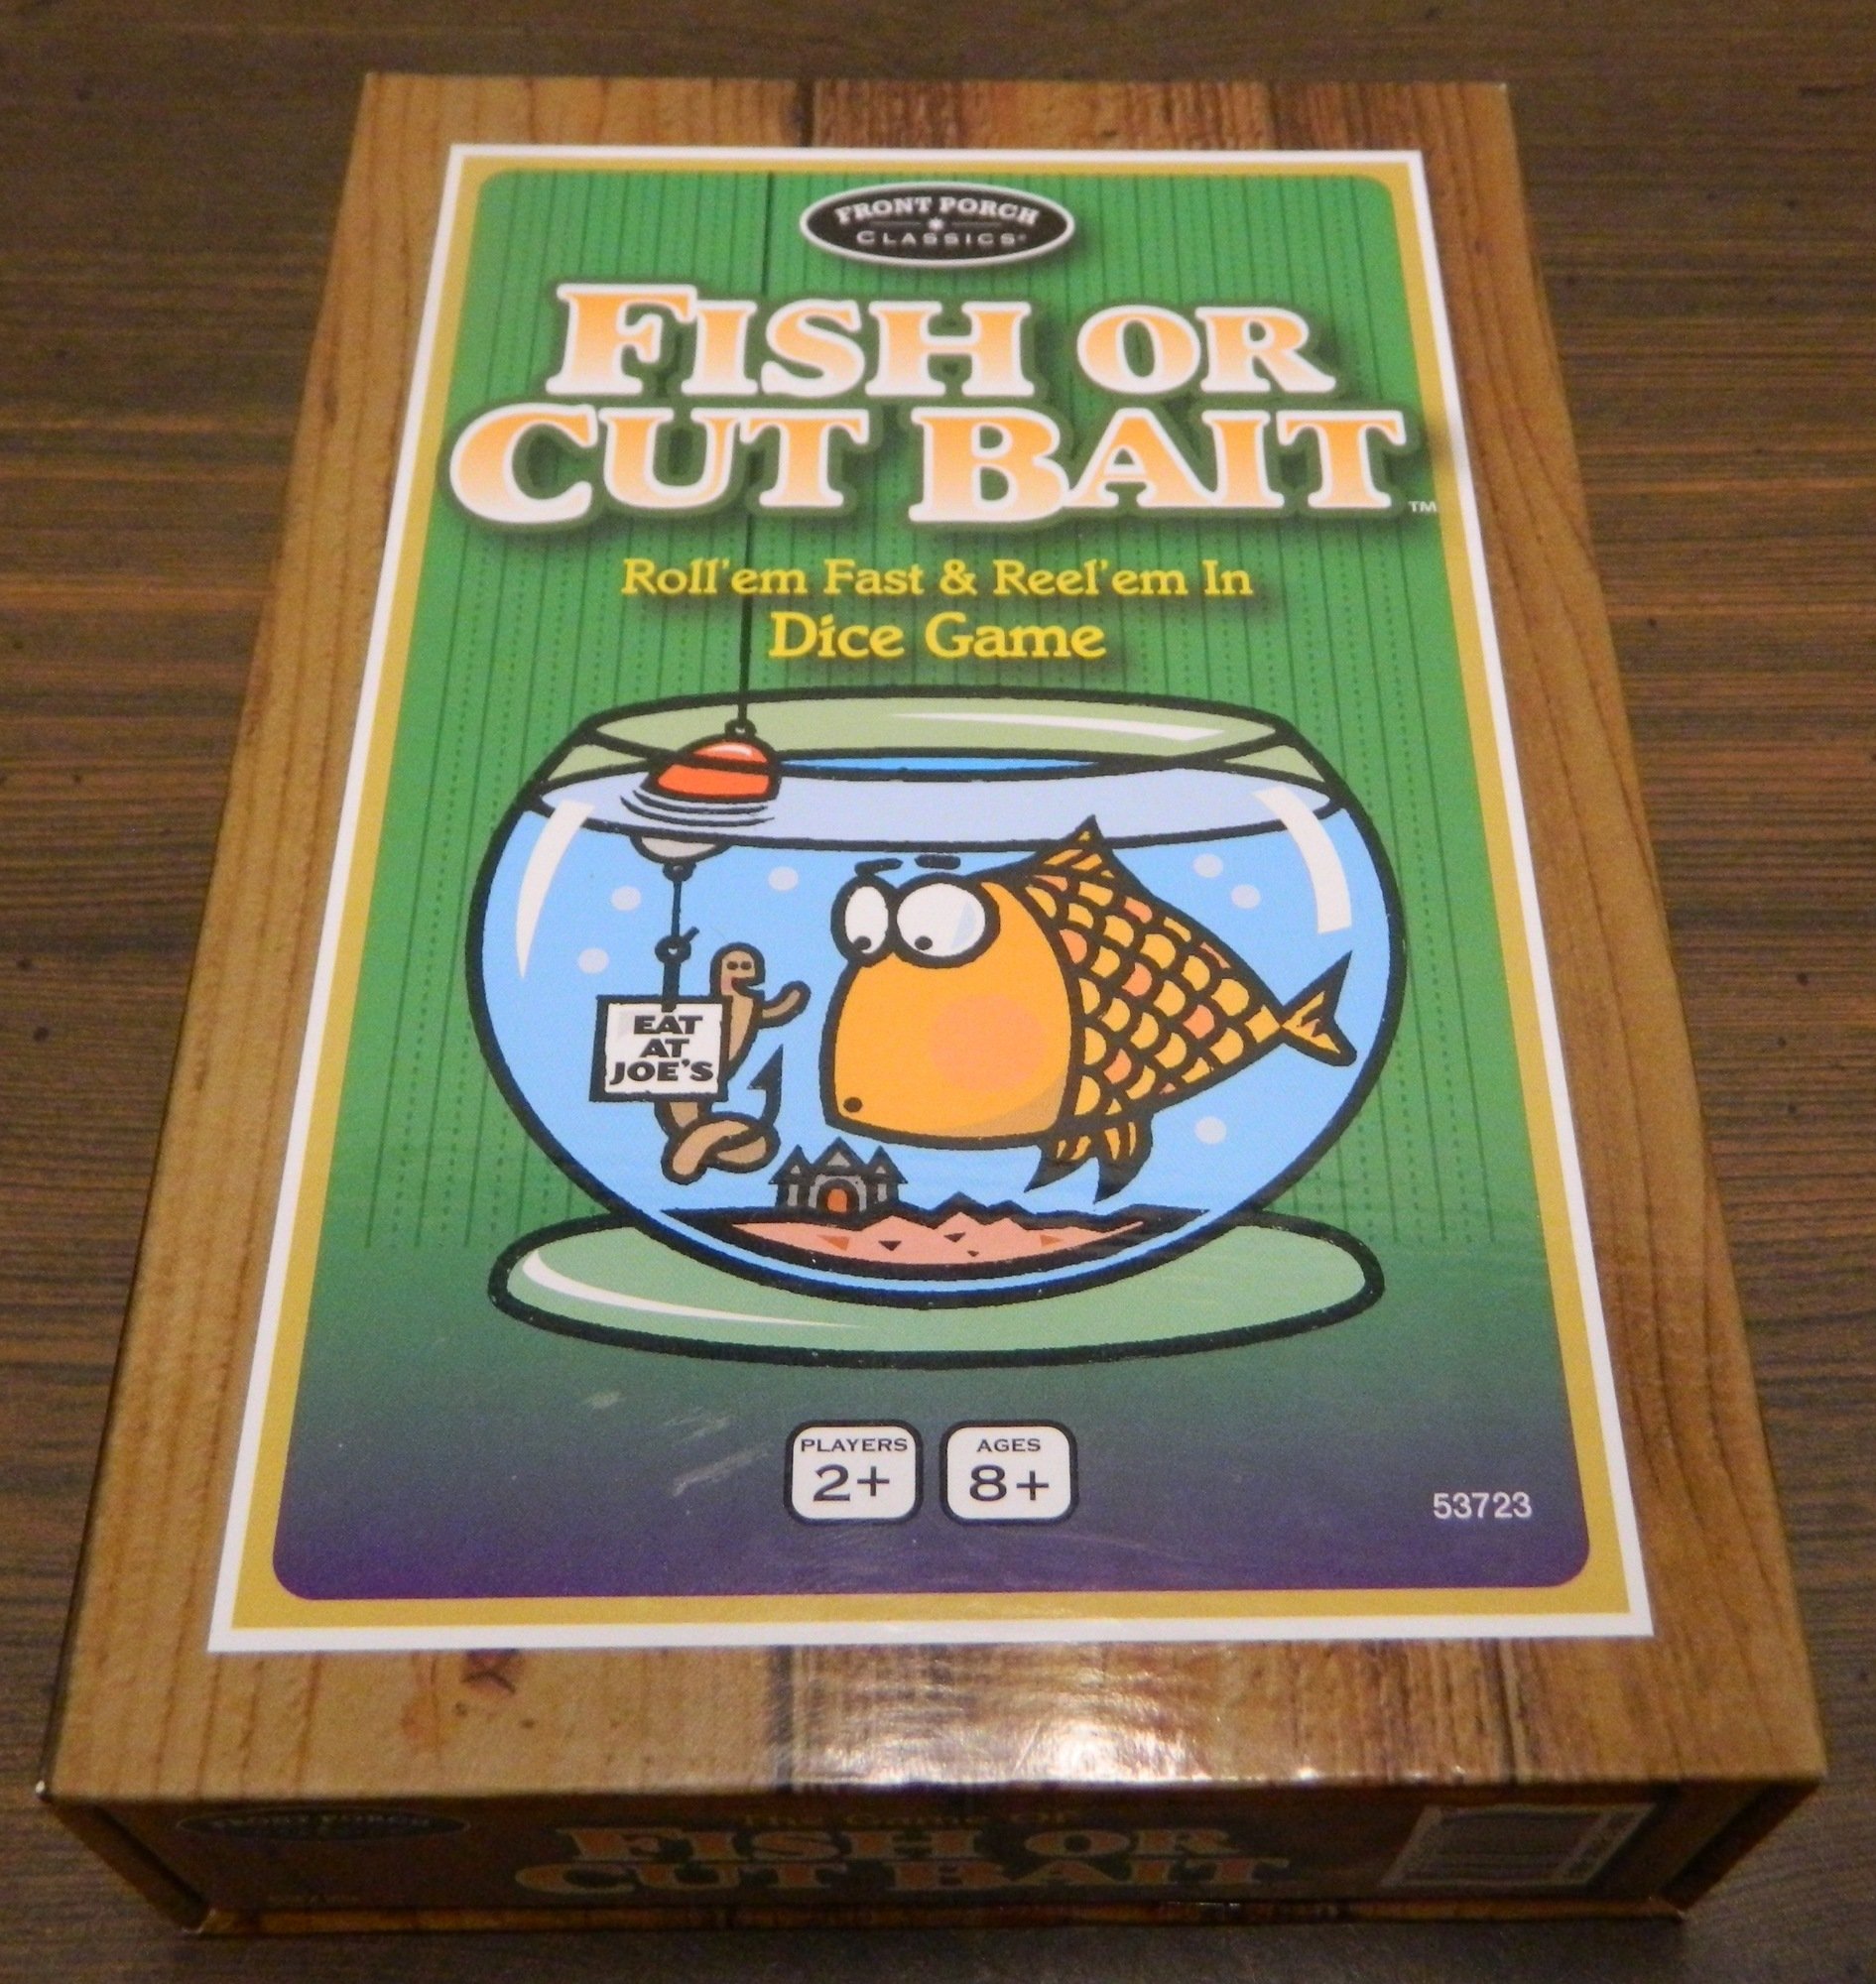 Box for Fish or Cut Bait